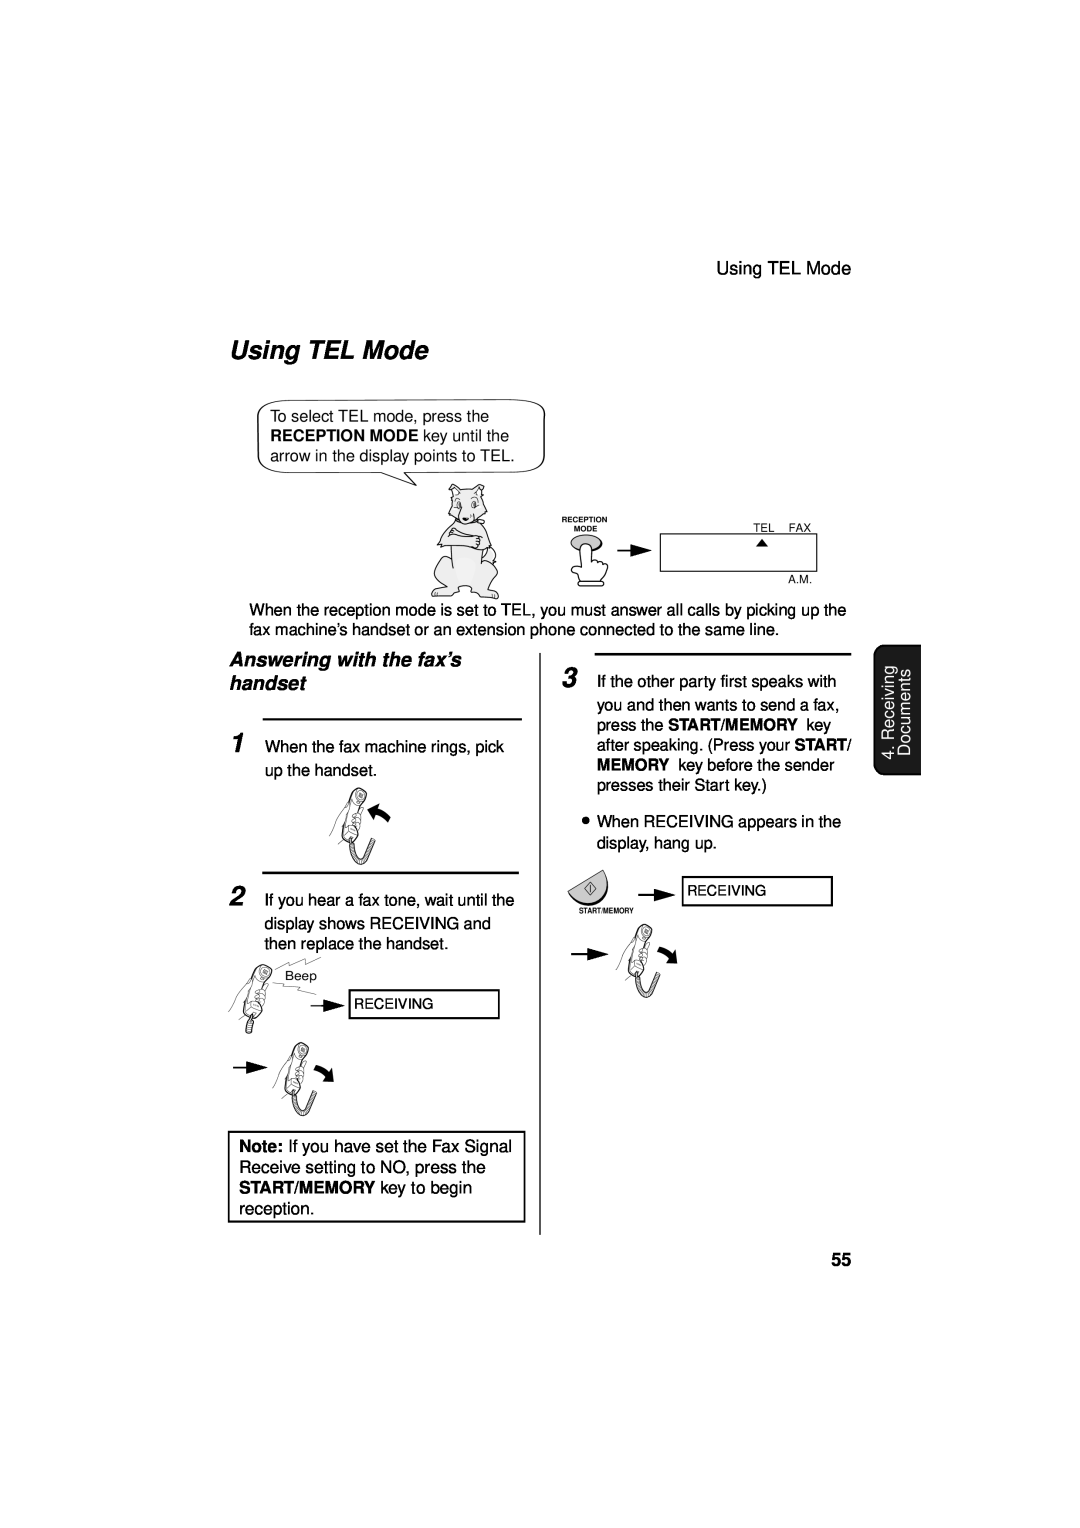 Sharp UX-340LM manual Using TEL Mode, Answering with the fax’s handset, Receiving Documents 